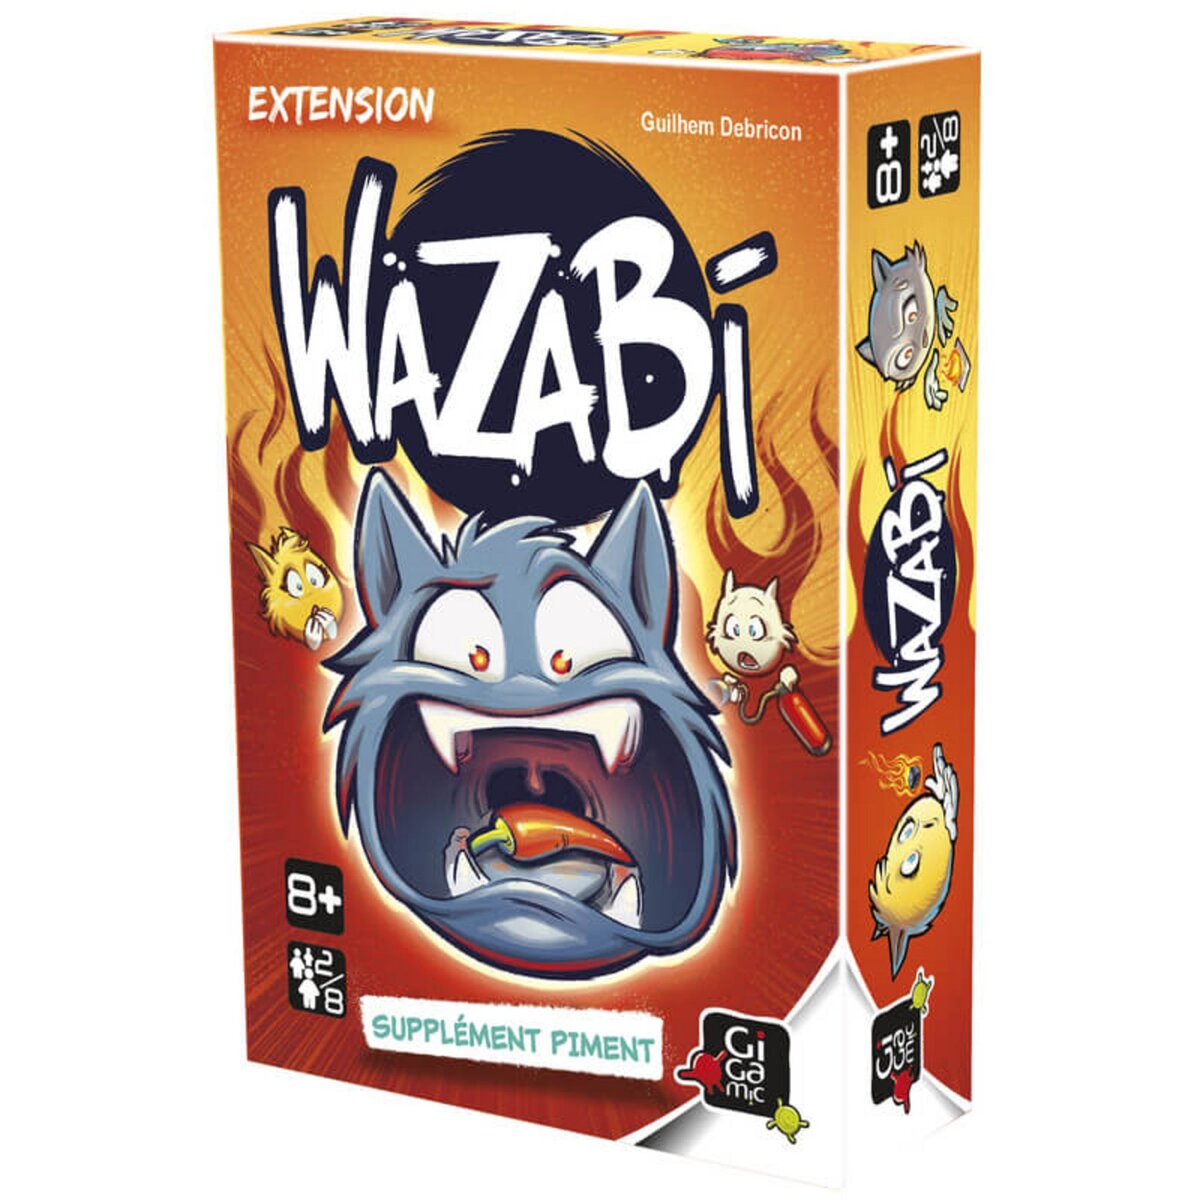 Gigamic EXTENSION WAZABI : SUPPLEMENT PIMENT